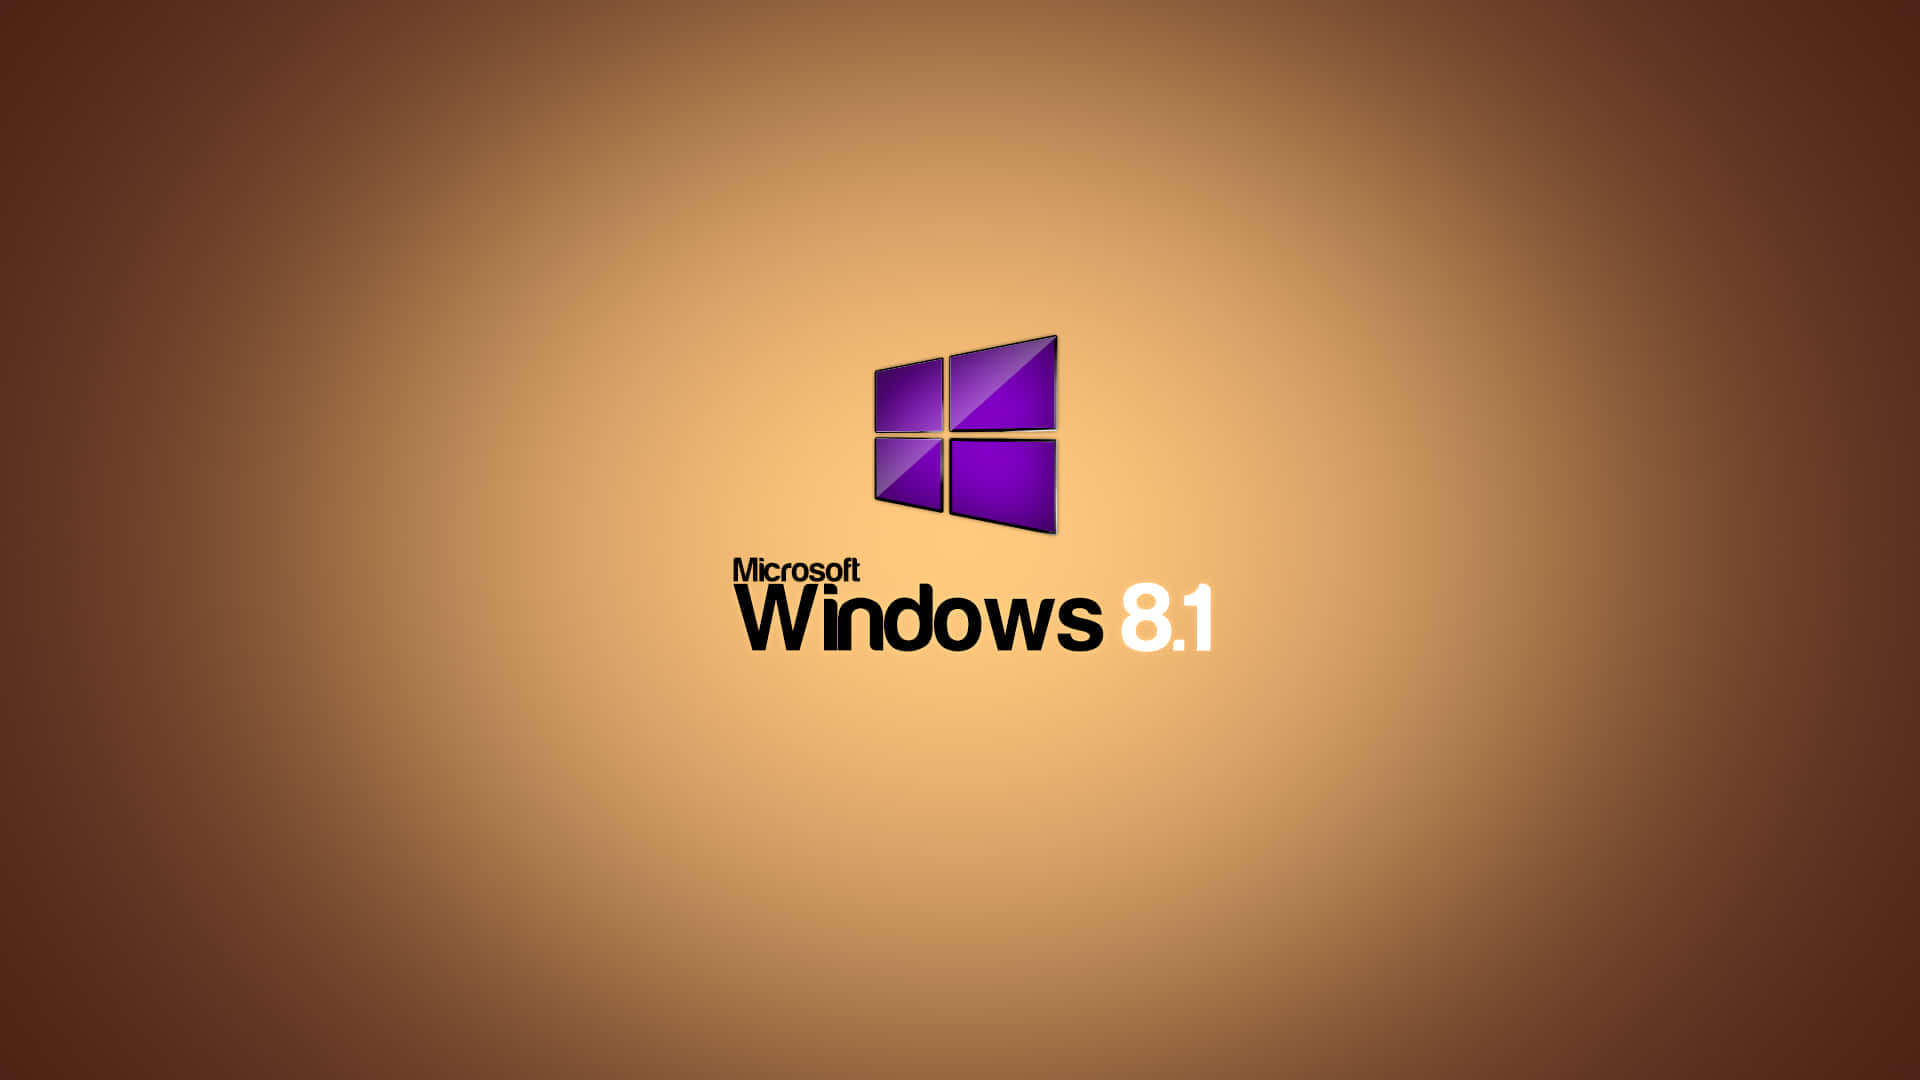 Enjoy The Full Potential Of Your Pc With Windows 8.1